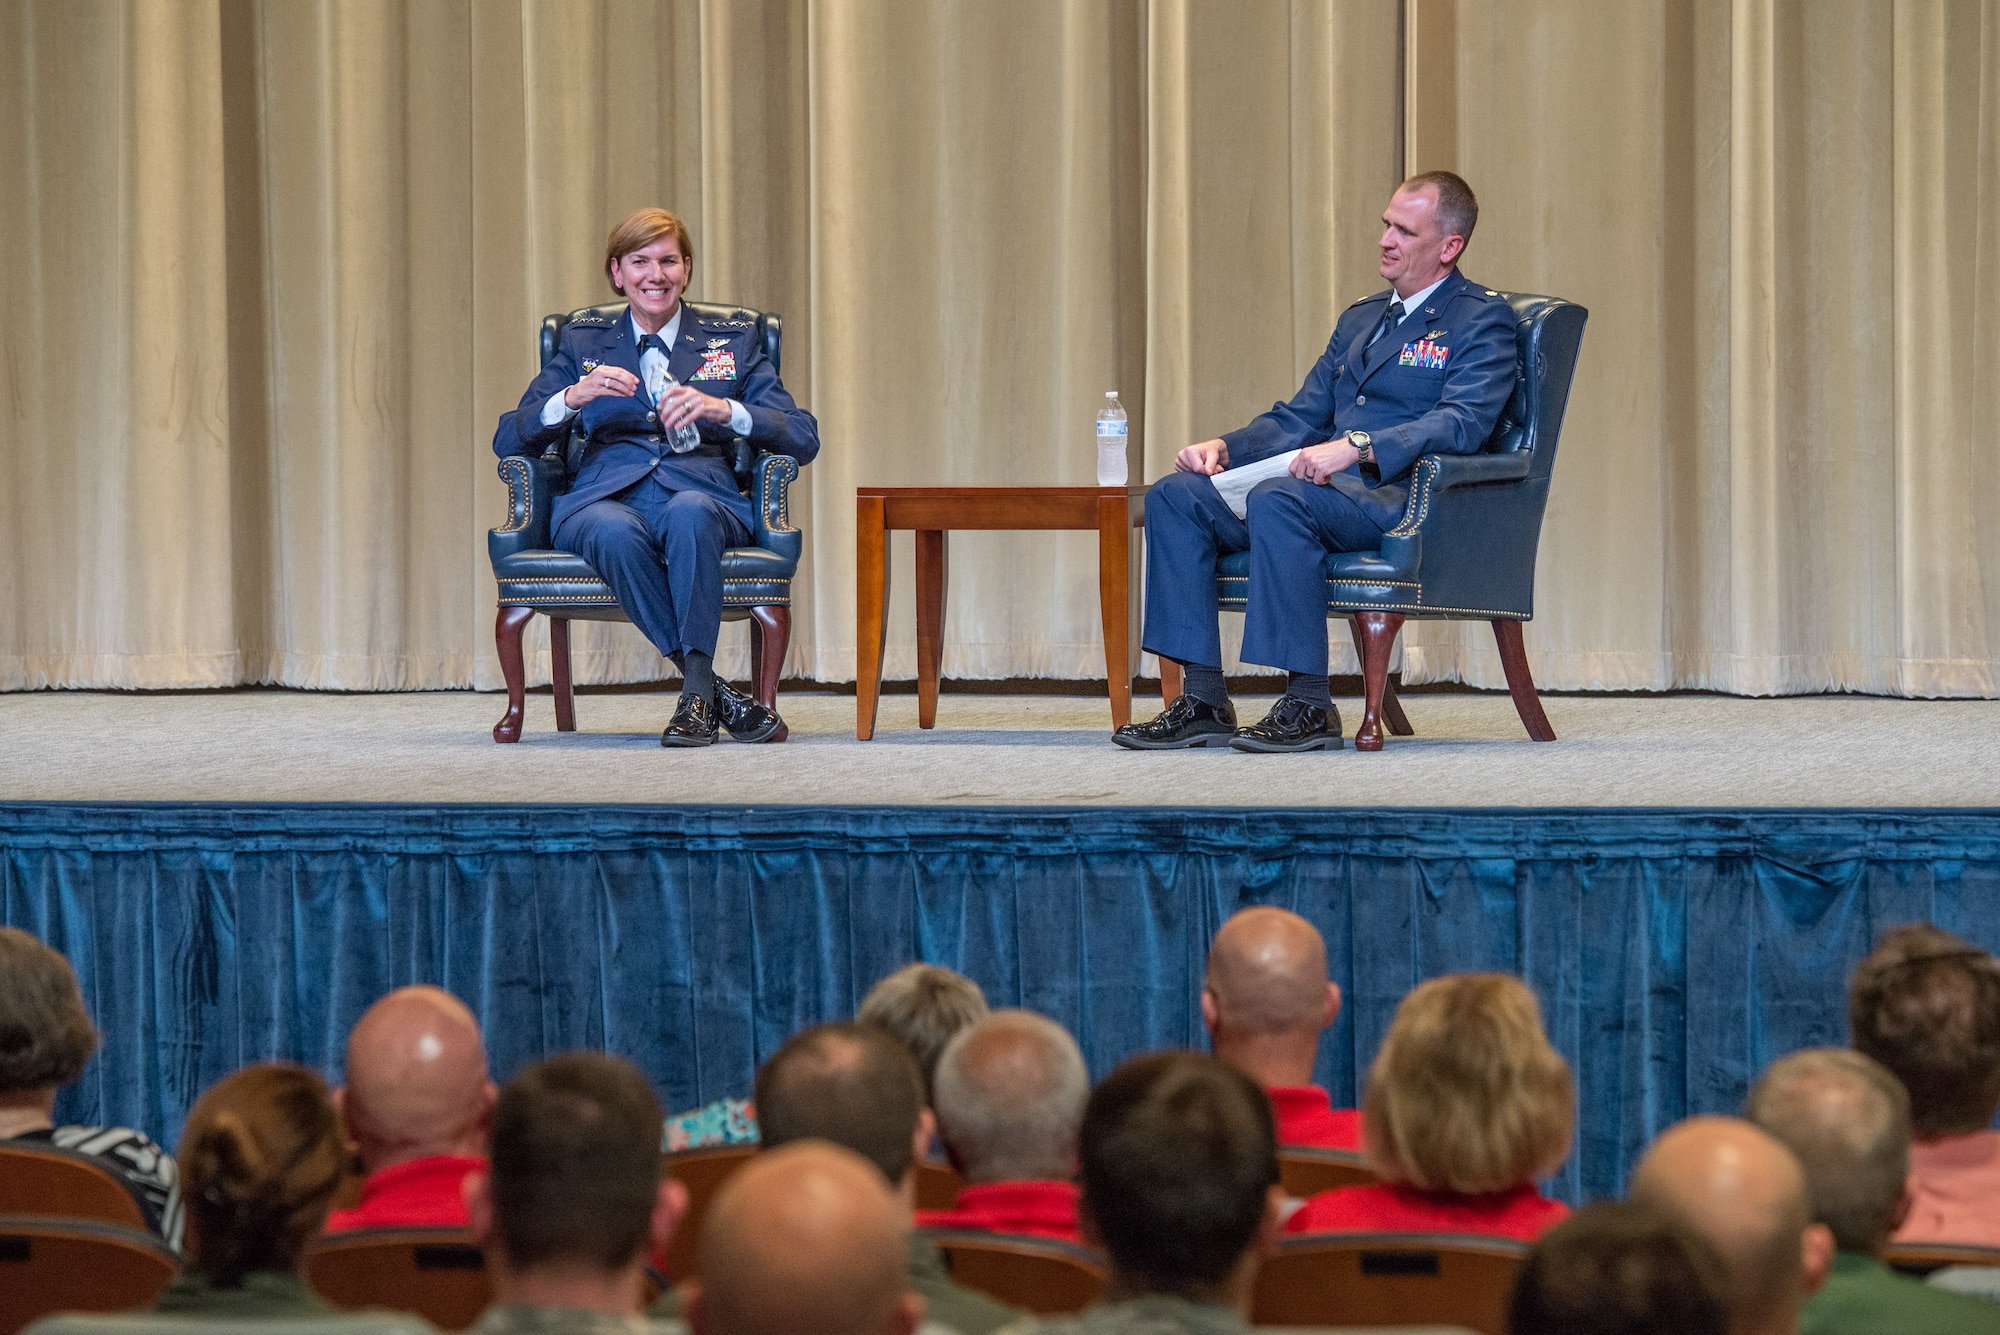 Aviation pioneers encourage innovation, resiliency during the annual Gathering of Eagles